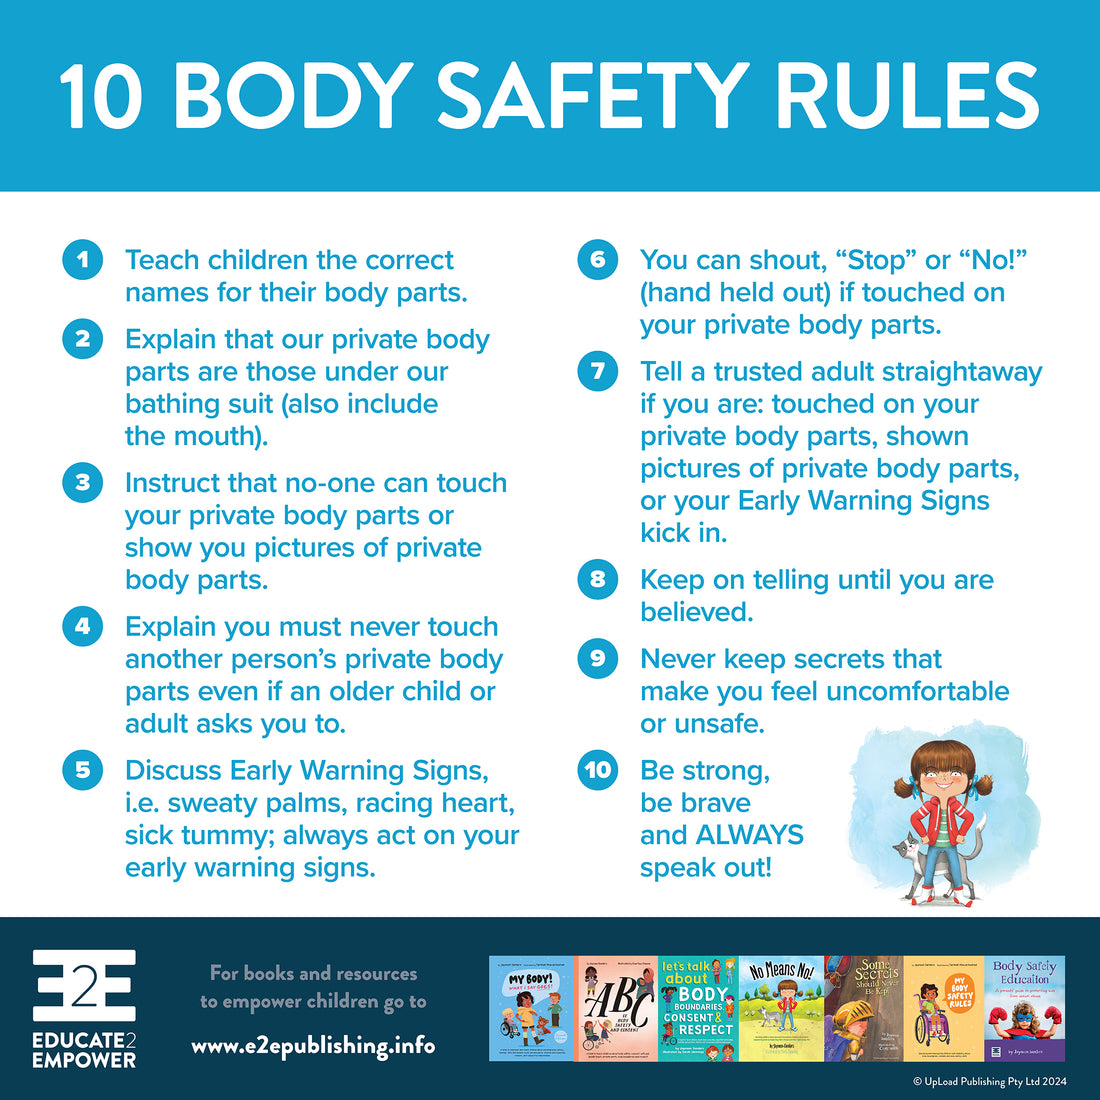 10 BODY SAFETY RULES